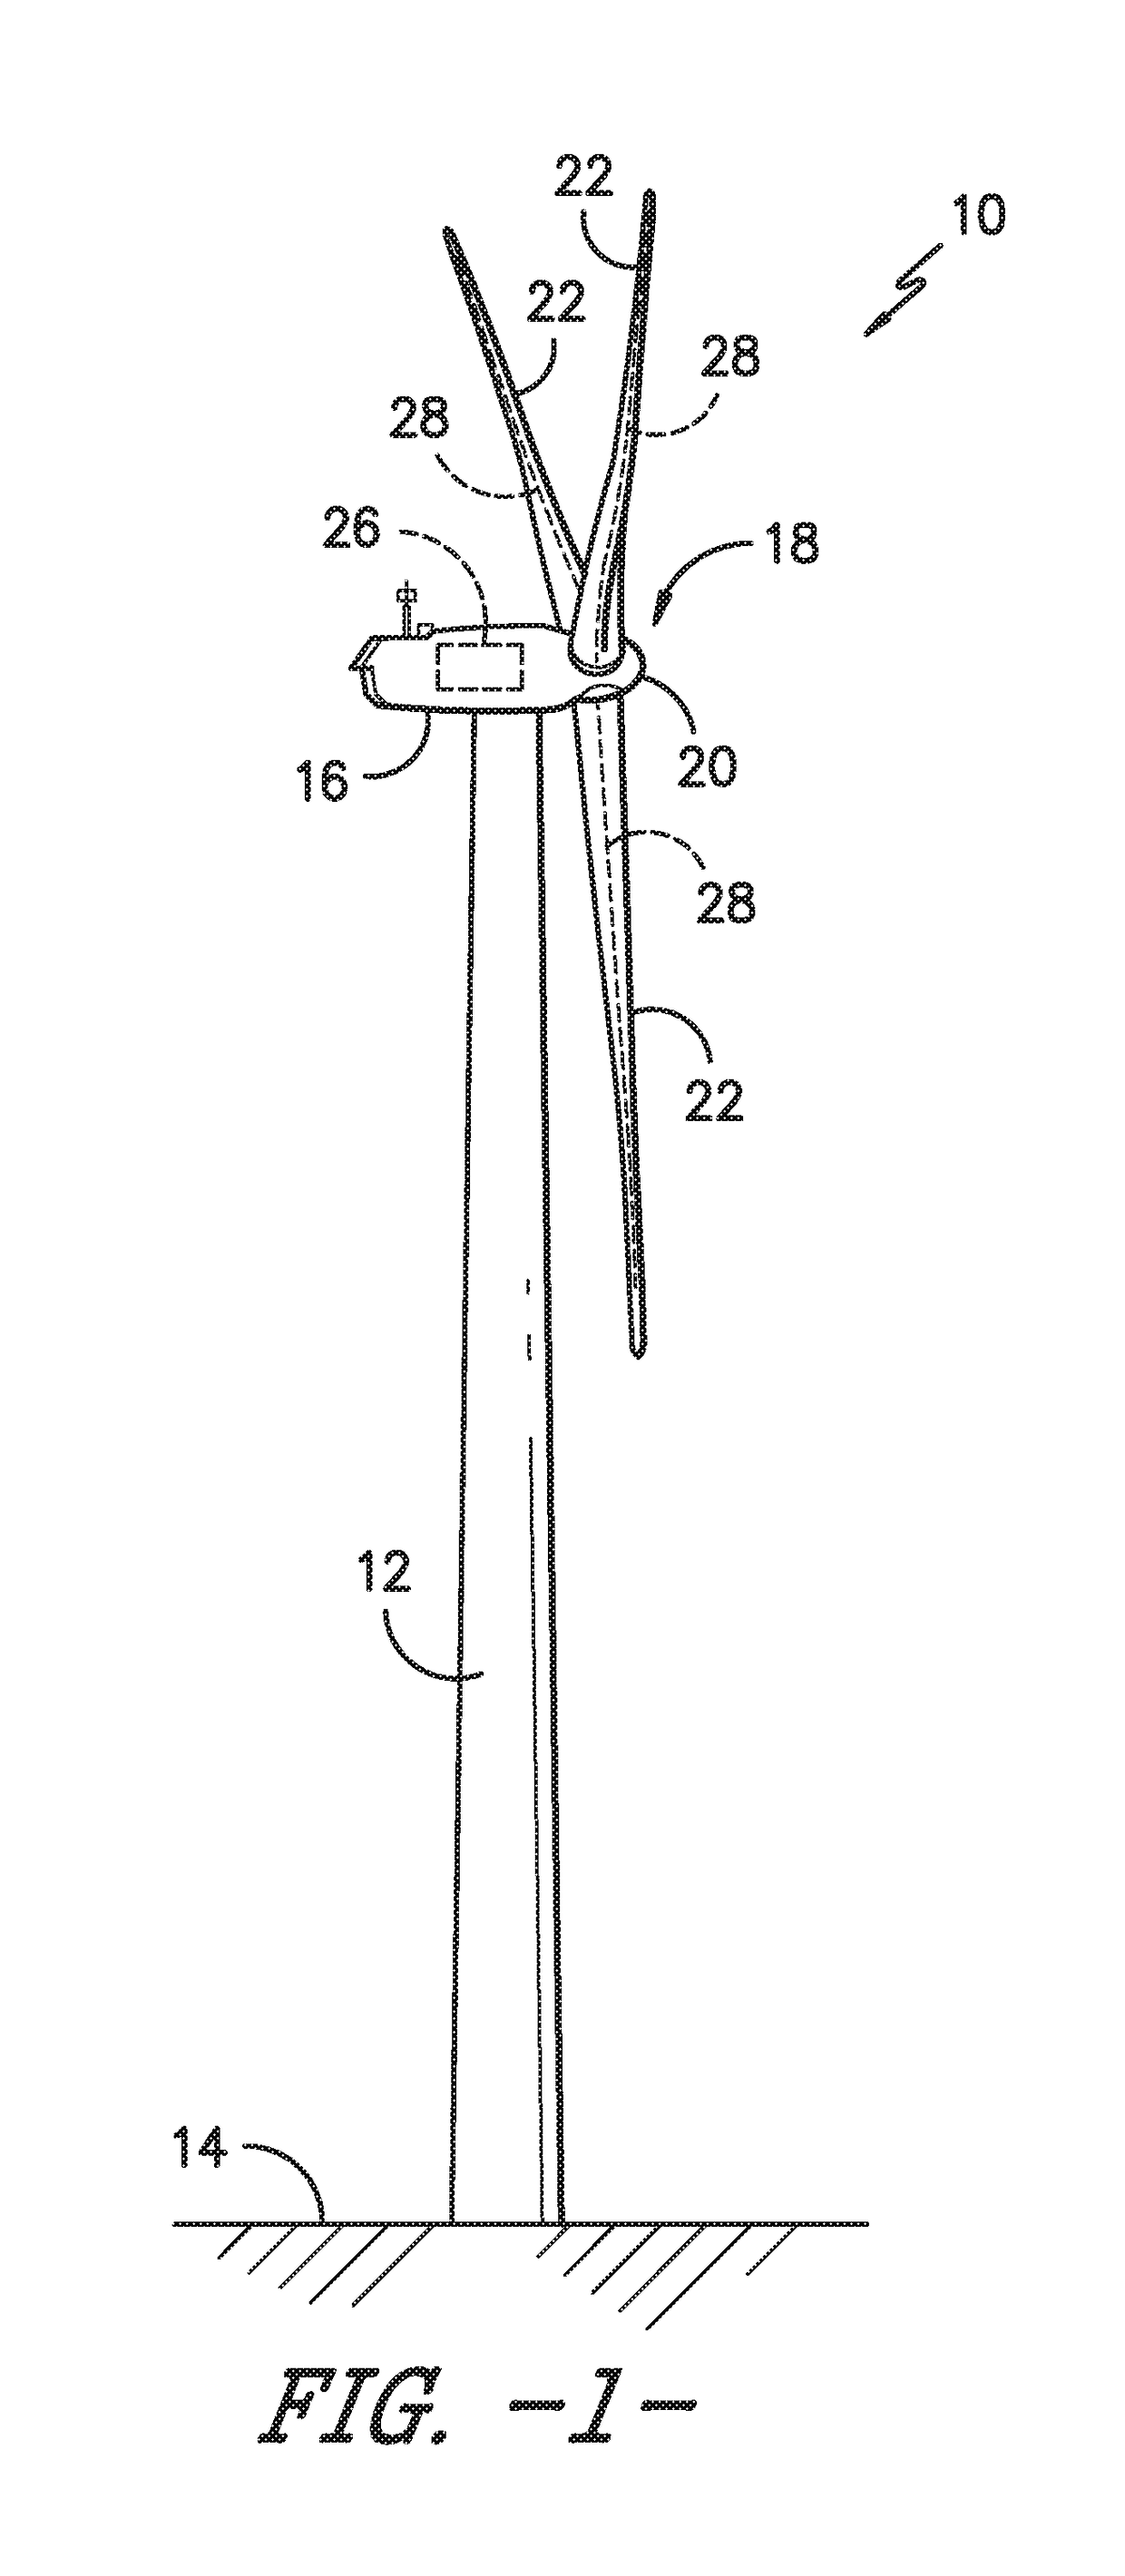 Method for Preventing Wind Turbine Rotor Blade Tower Strikes